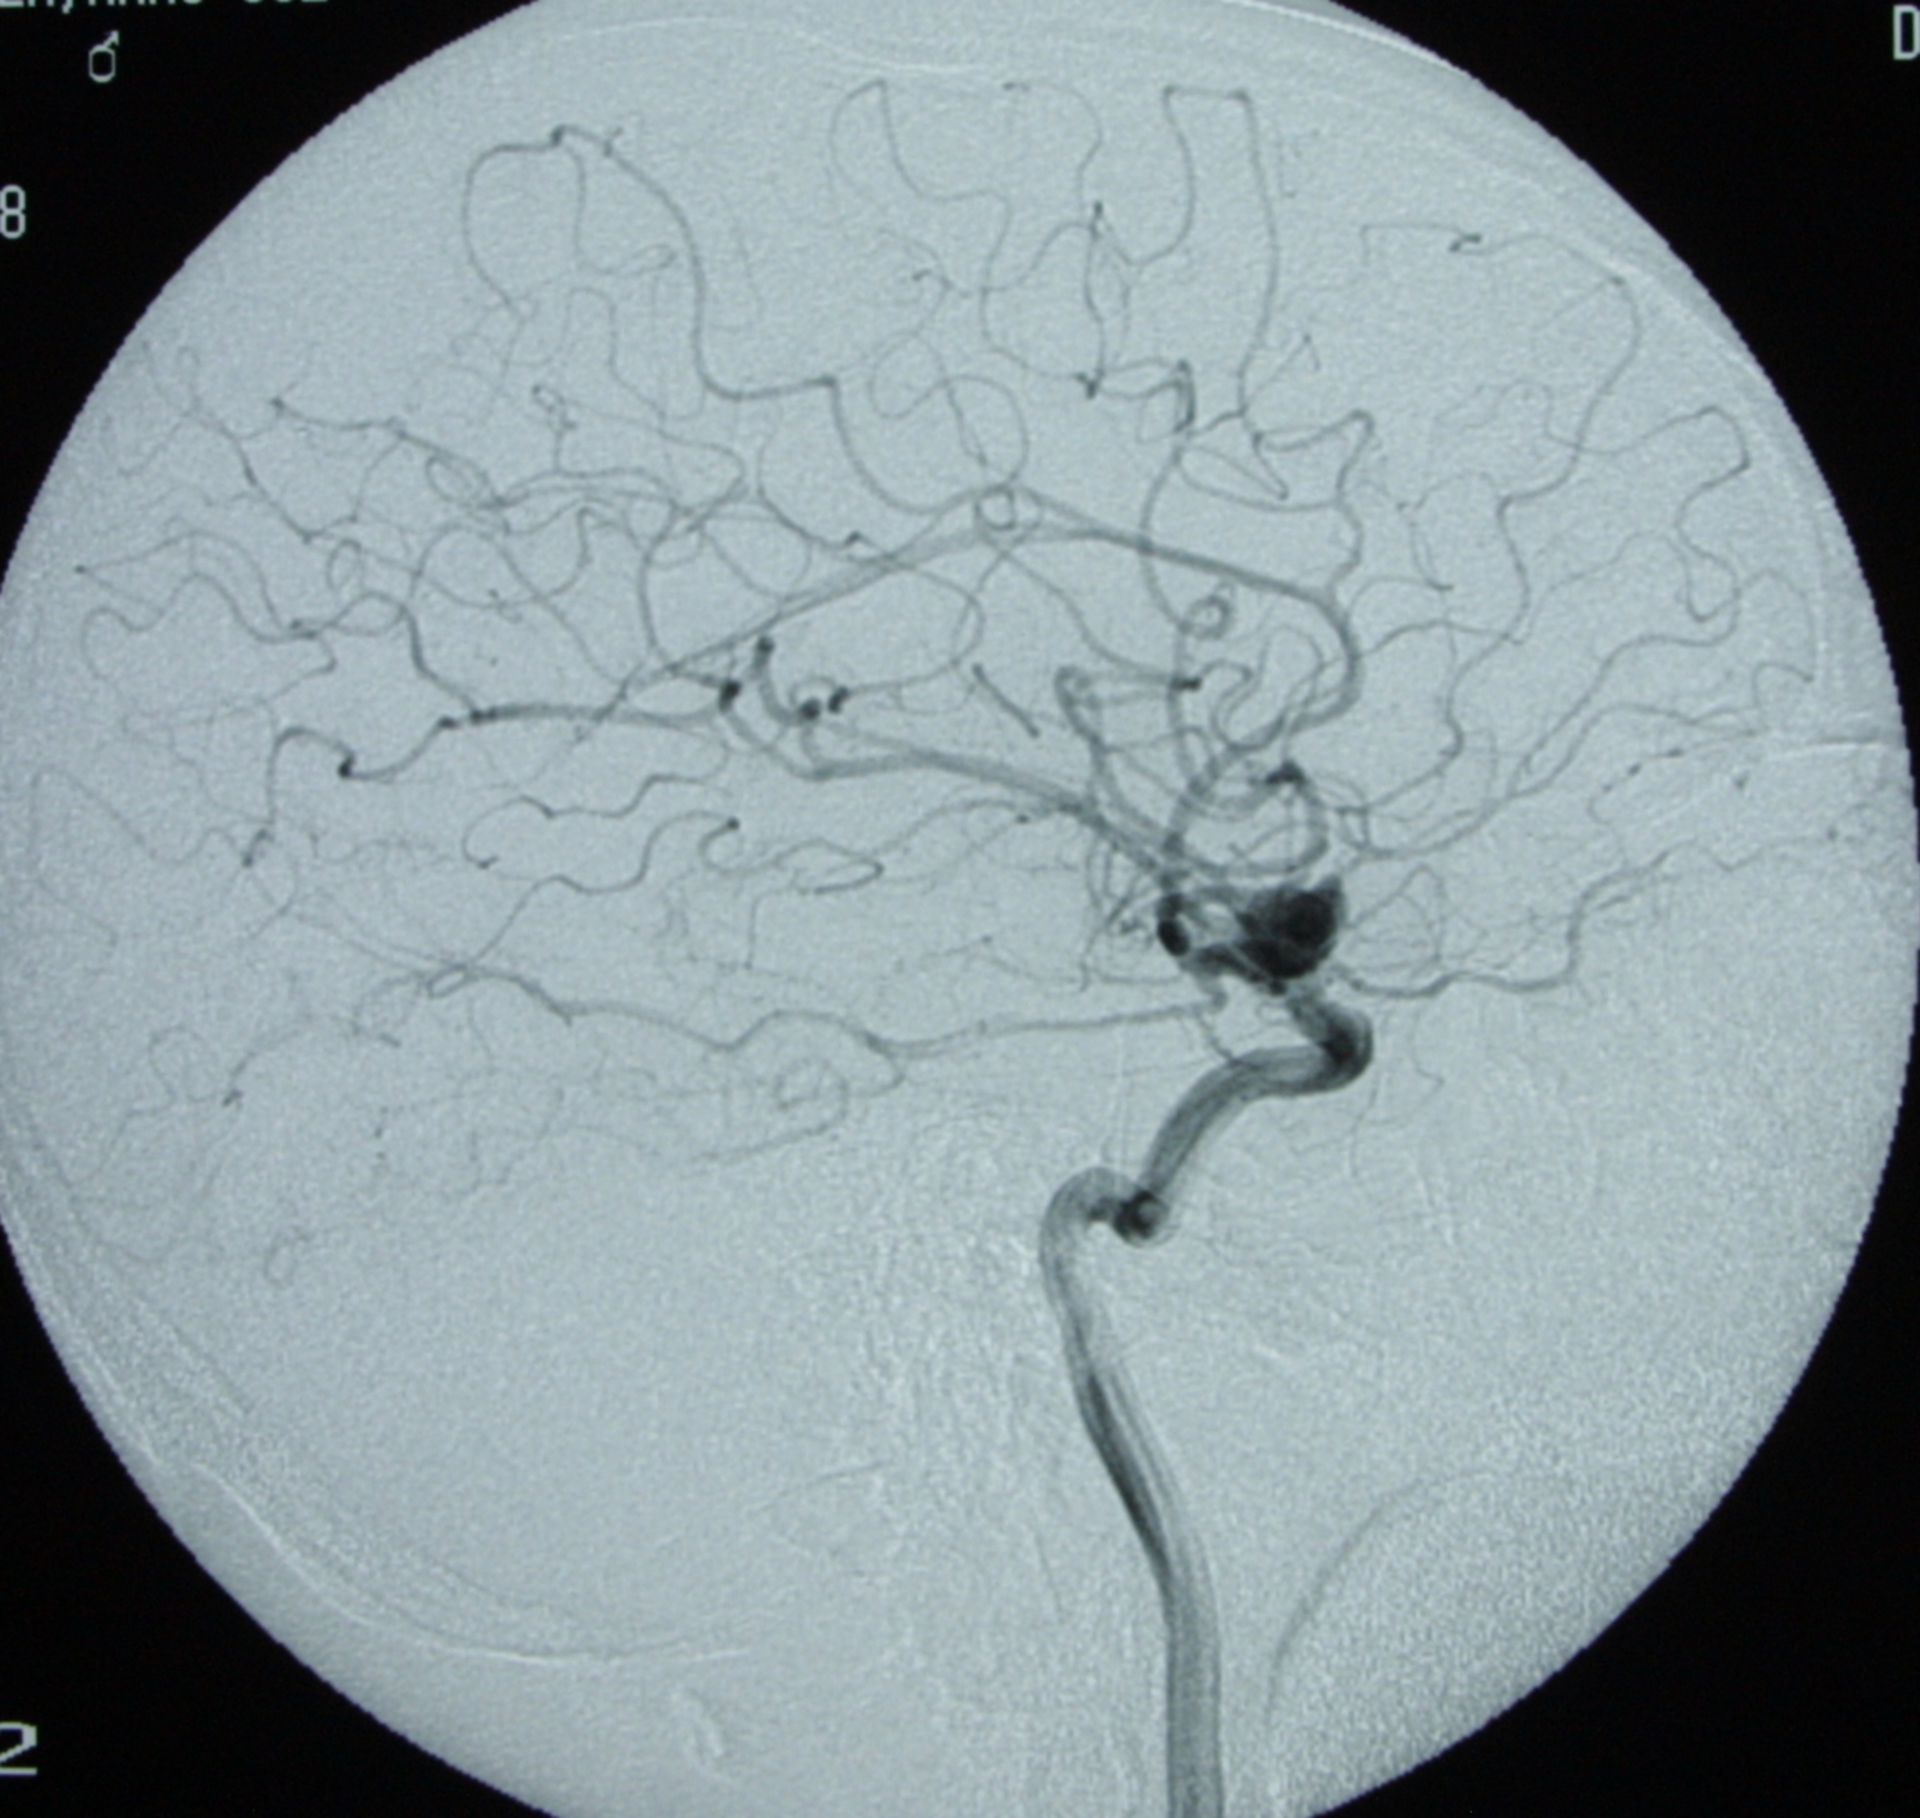 Aneurysm - lateral angiography